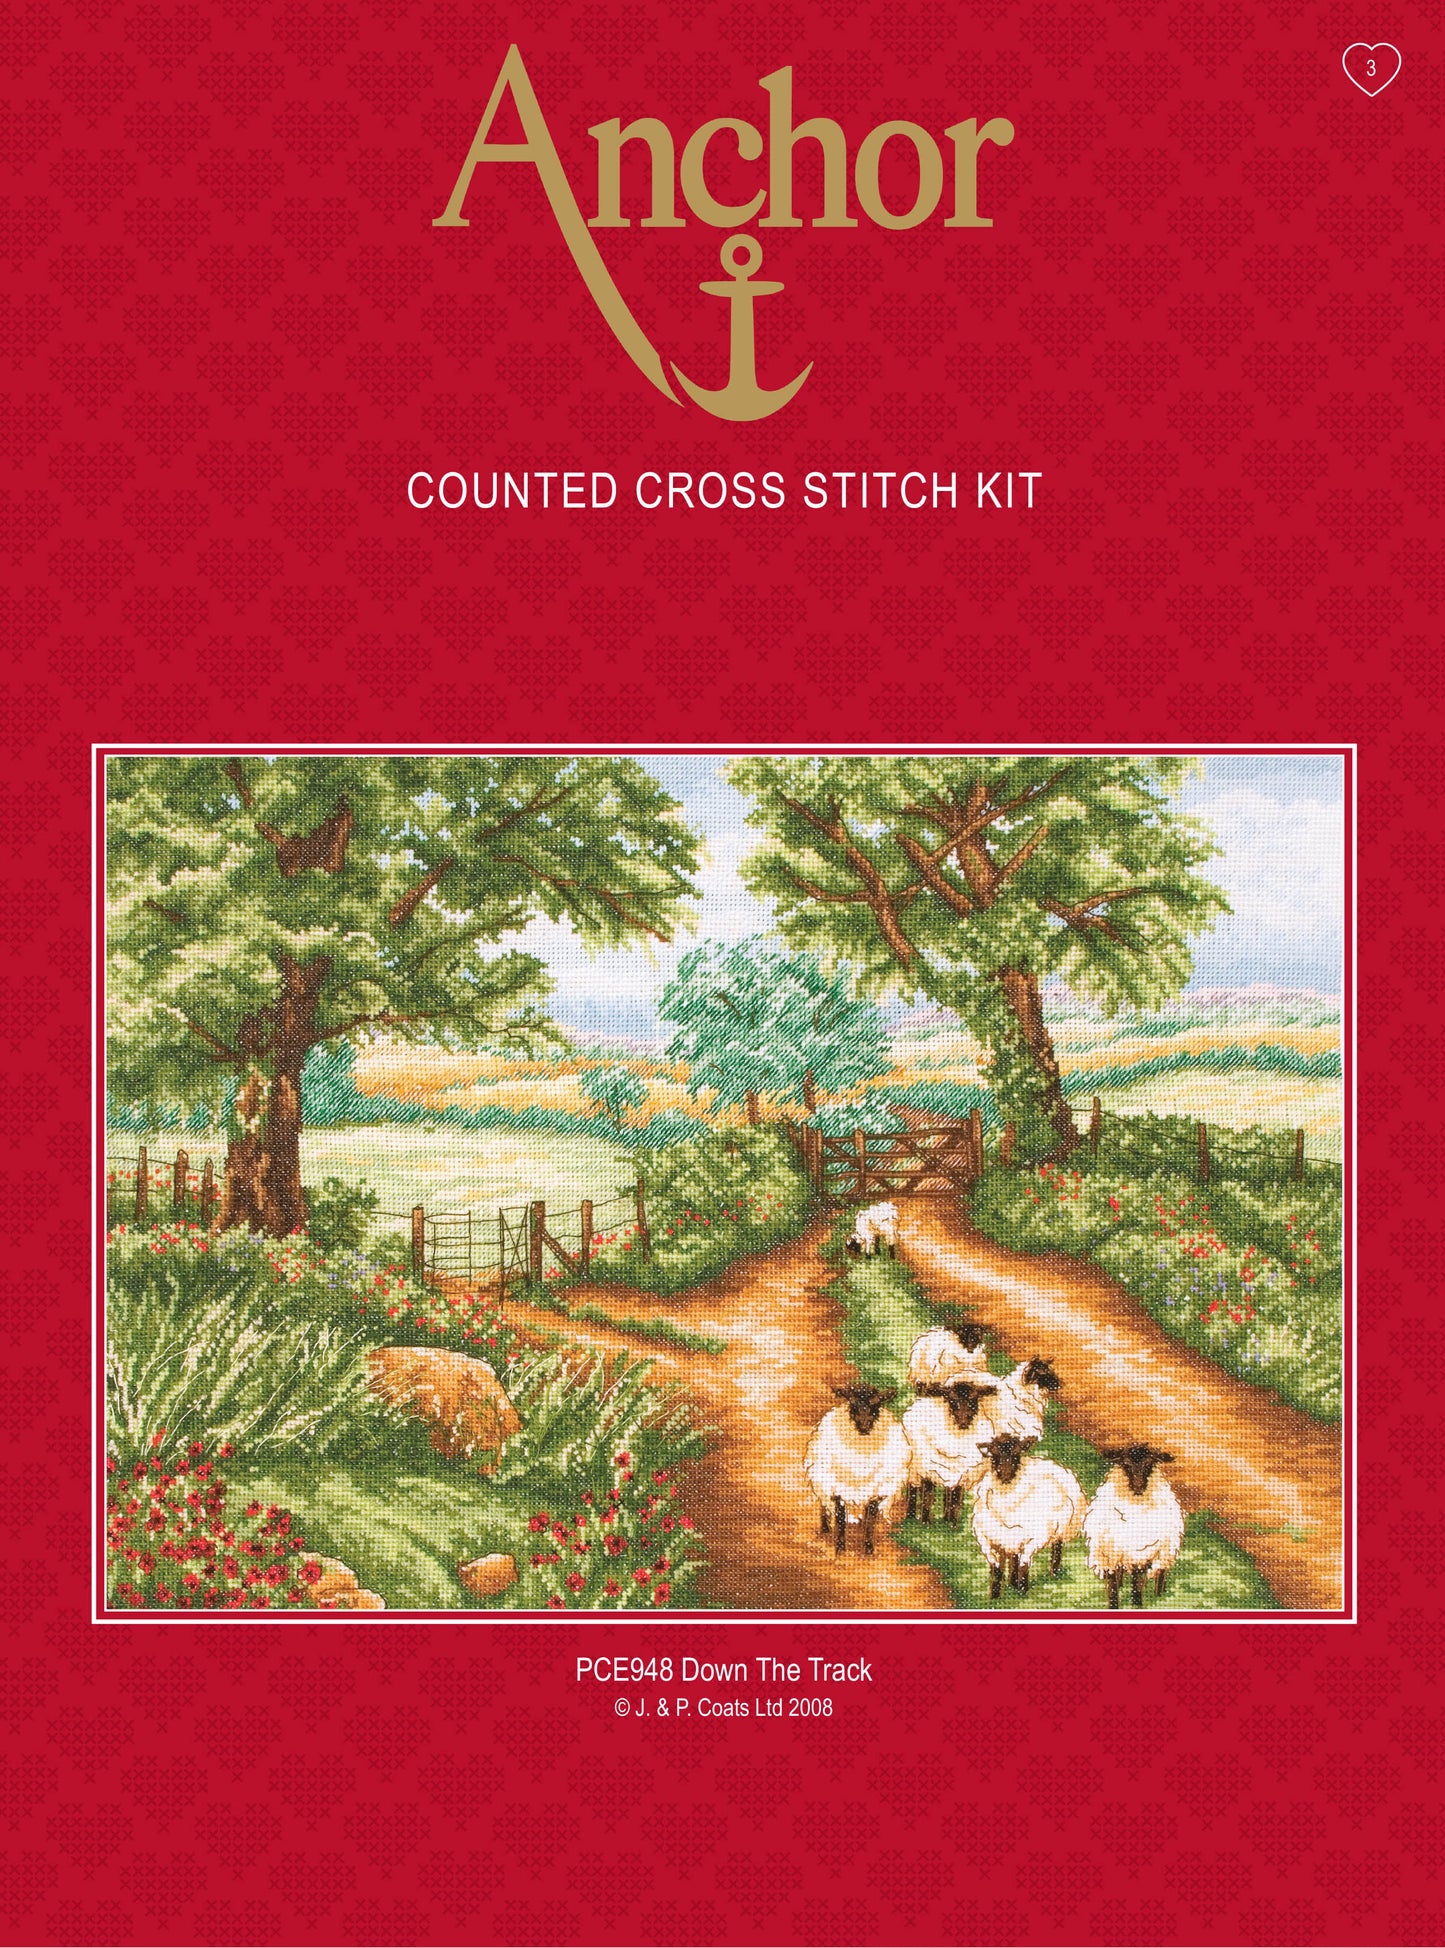 Anchor Counted Cross Stitch Kit Down the Track